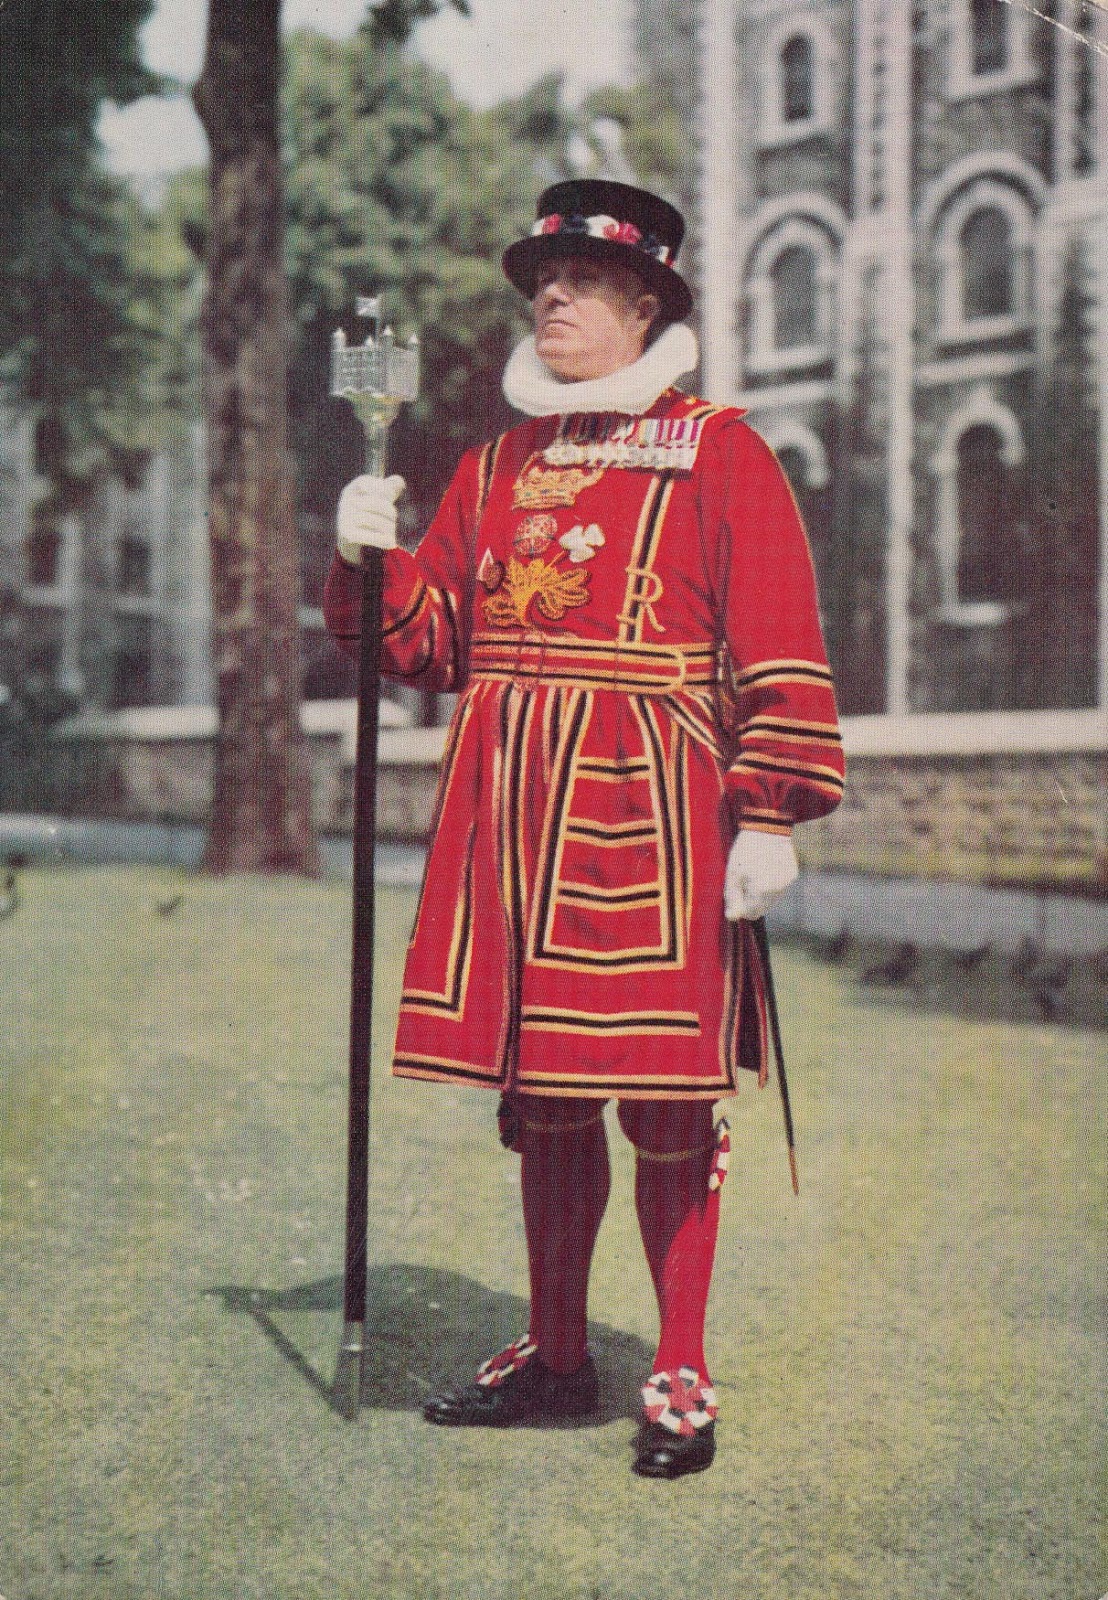 the odd postcard: beefeaters 2